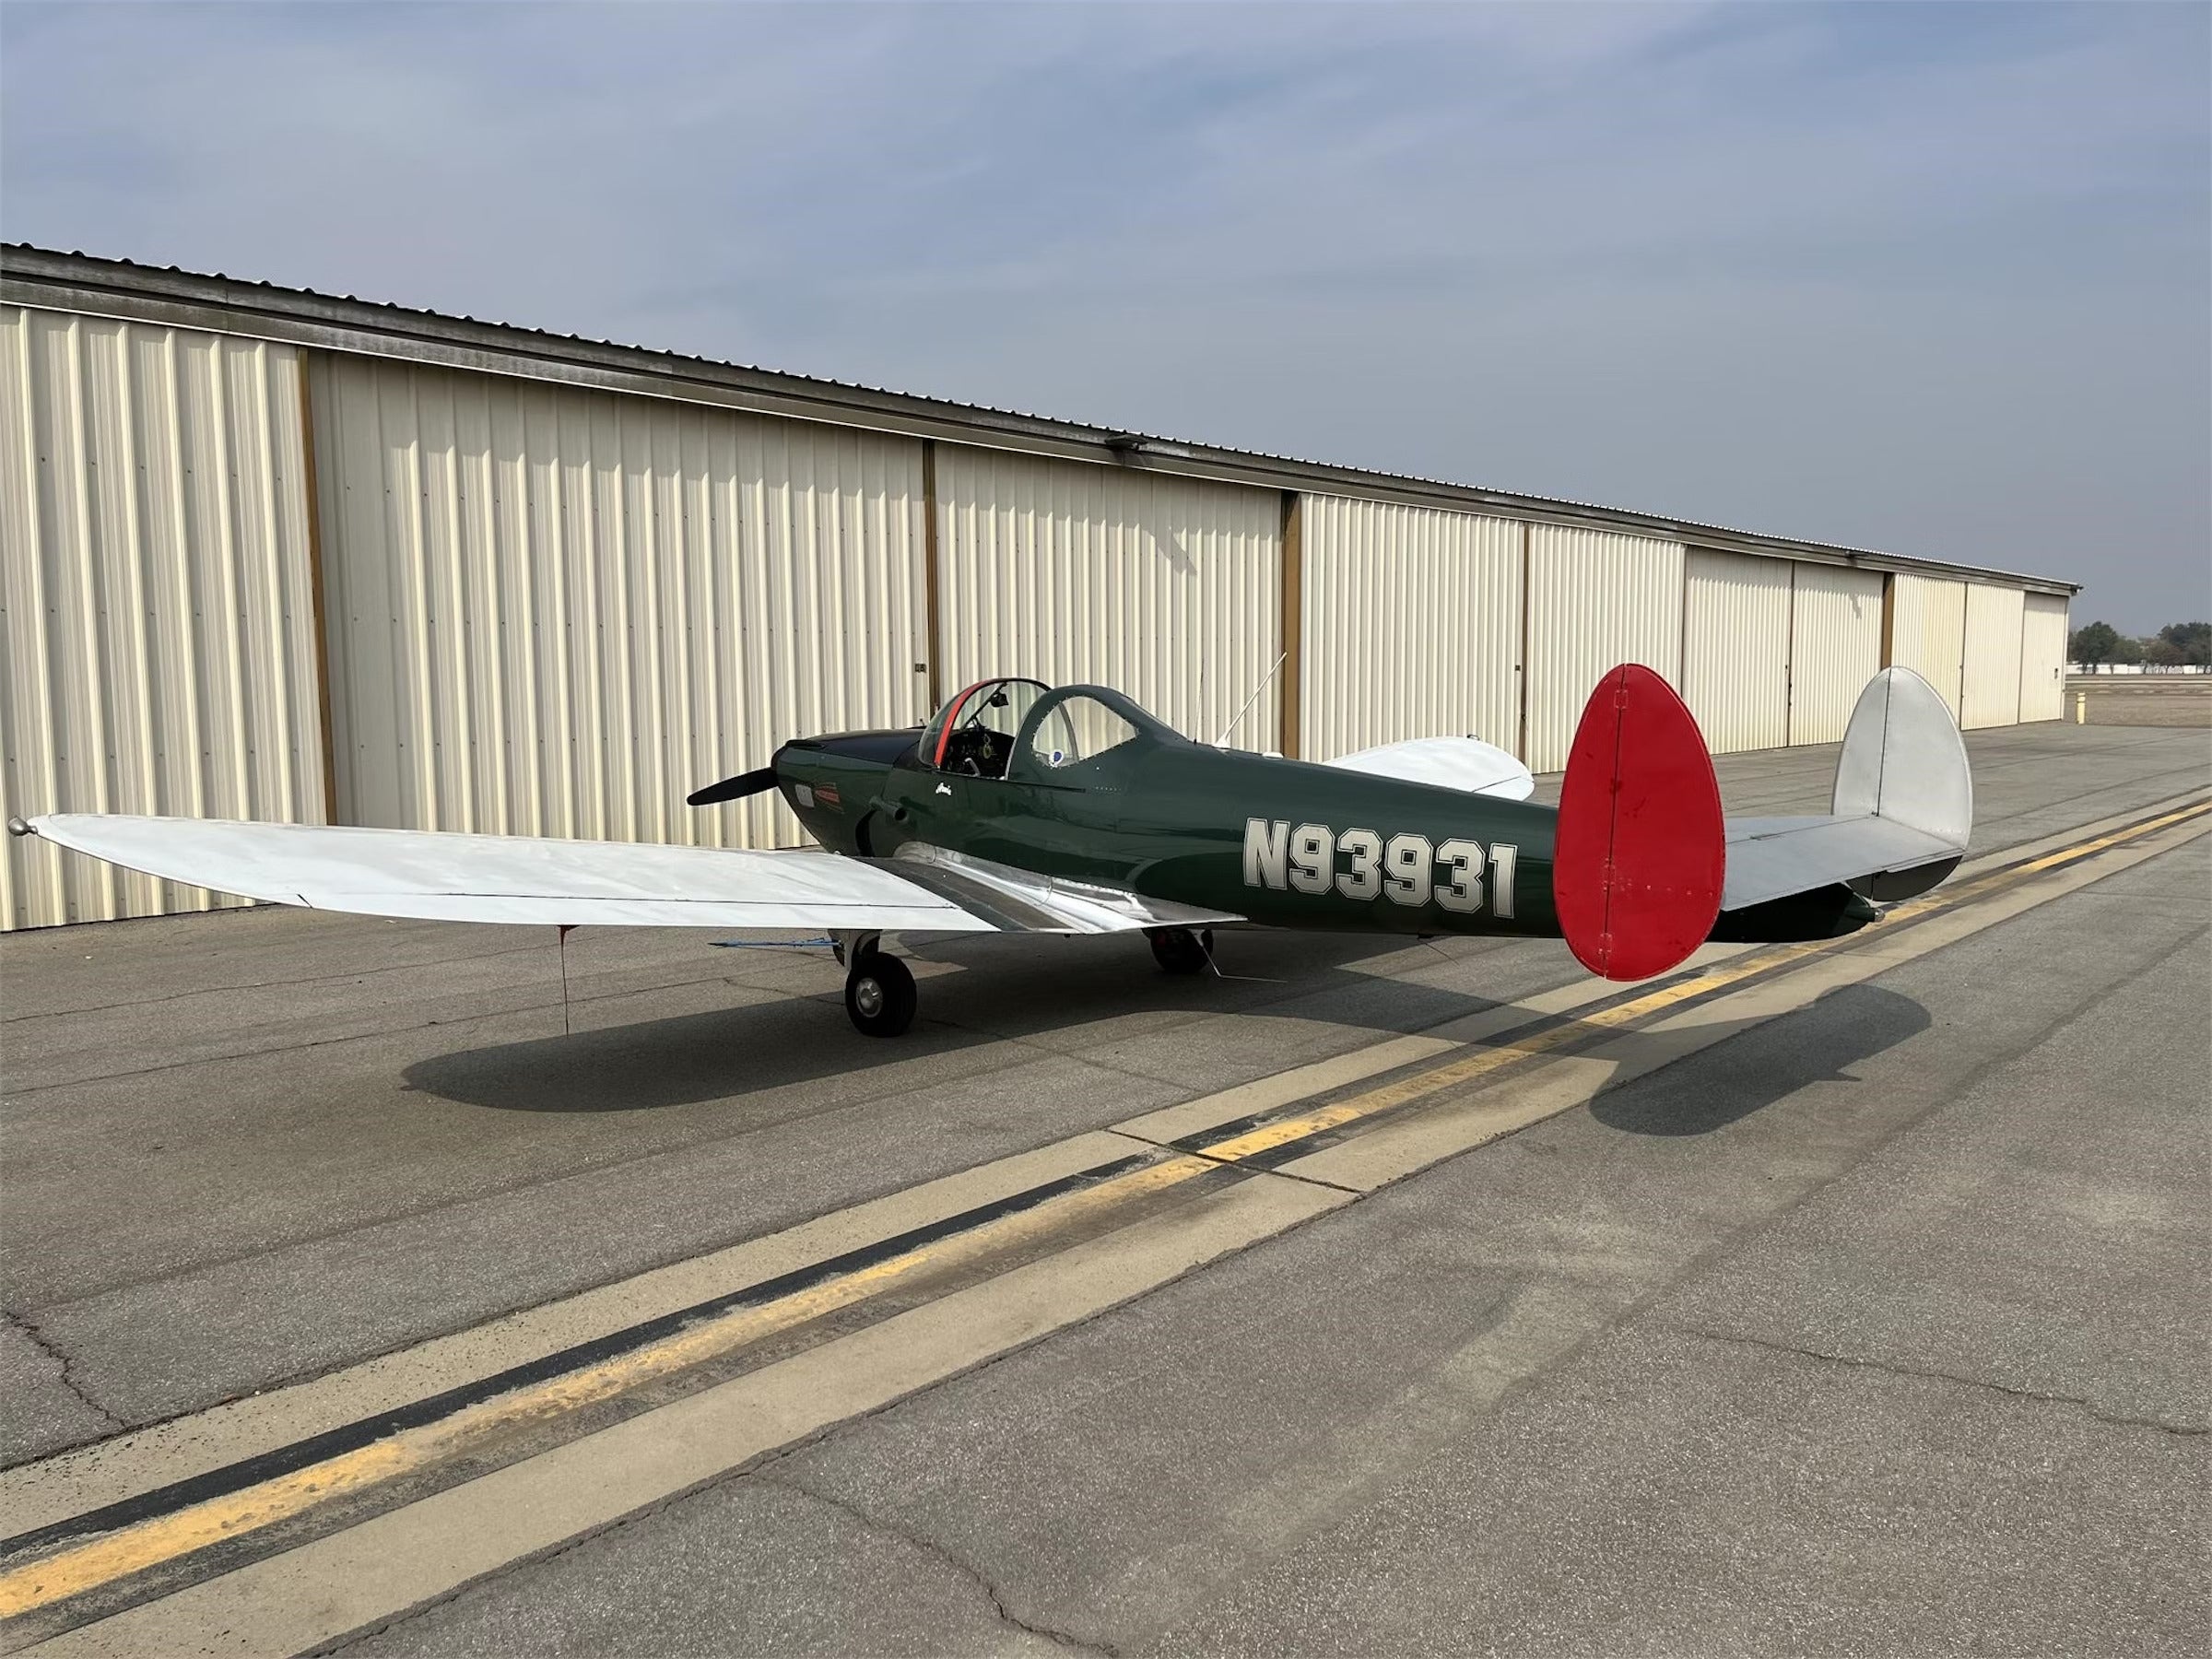 This 1946 ERCO 415-D Ercoupe Is an ‘AircraftForSale’ Top Pick Built For Safety